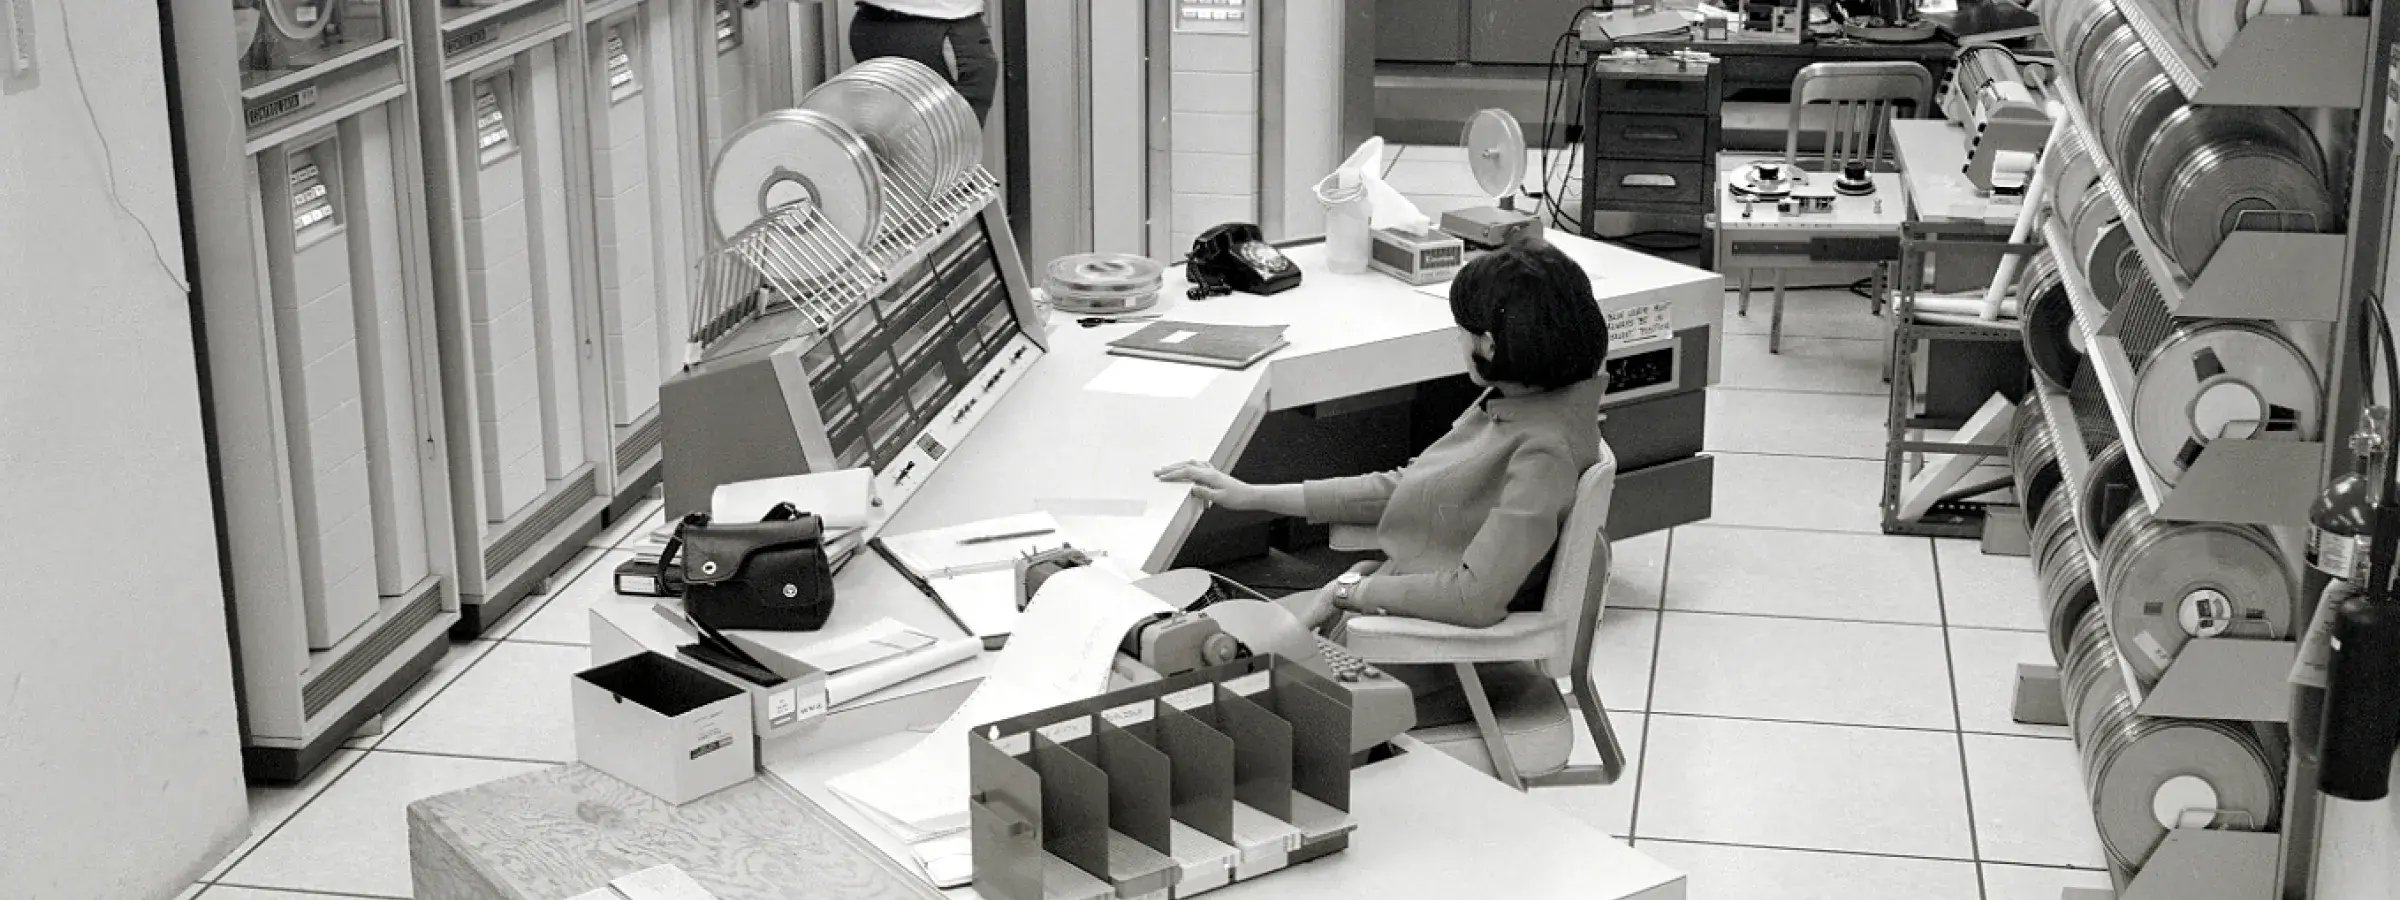 black and white image of two people in computer room with tape driven mainframe computers